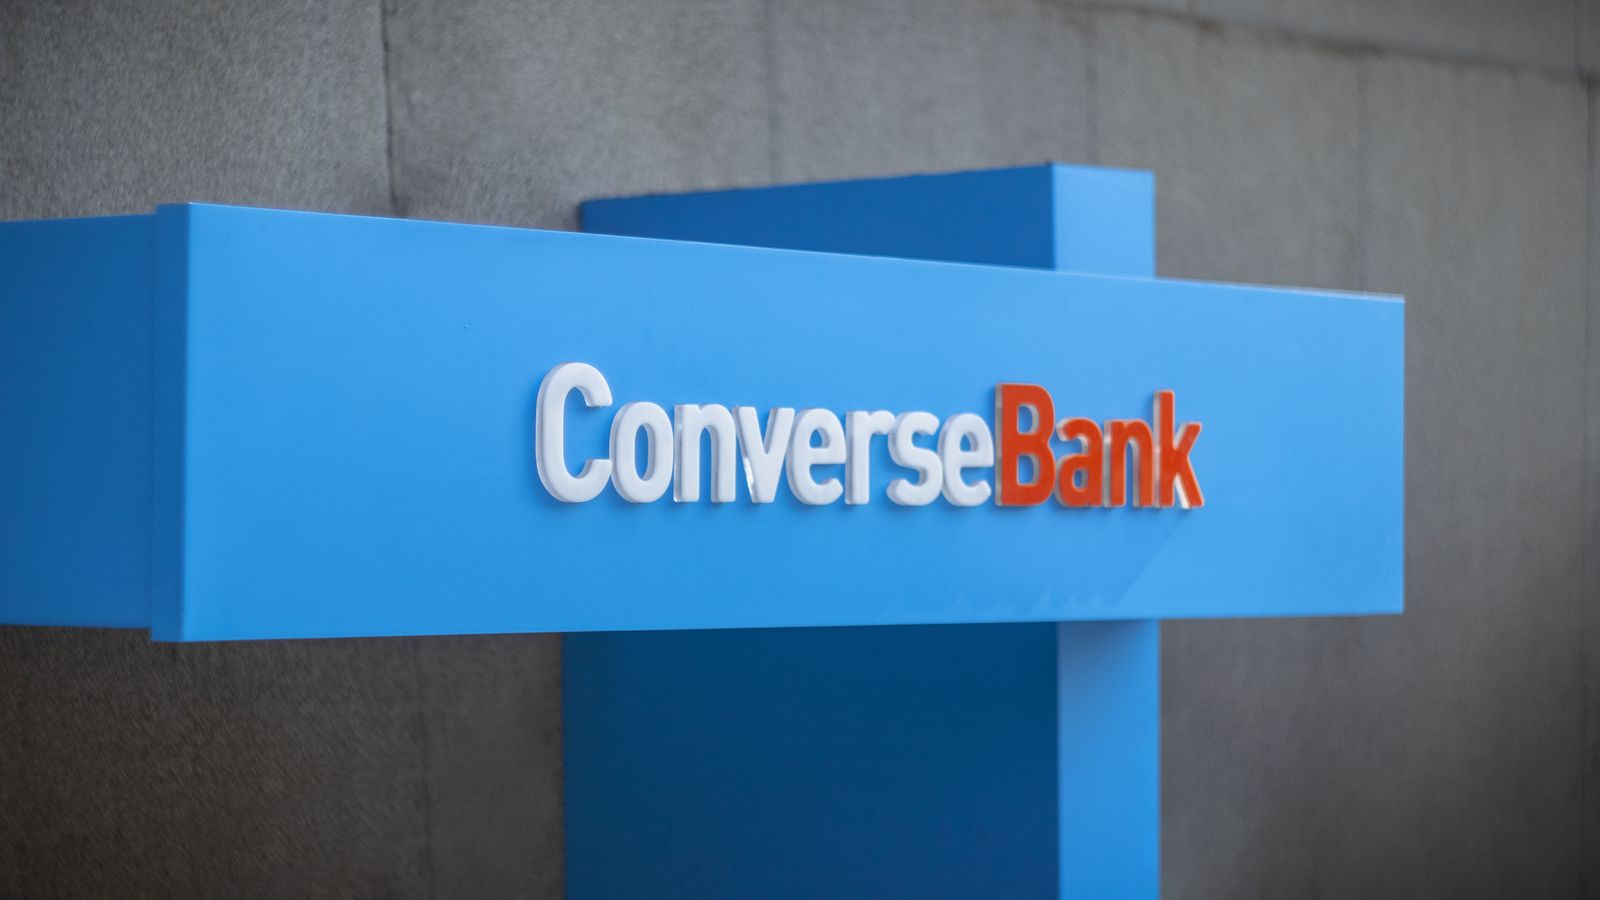 Converse Bank 3d sign letters displaying the company name made of acrylic and aluminum